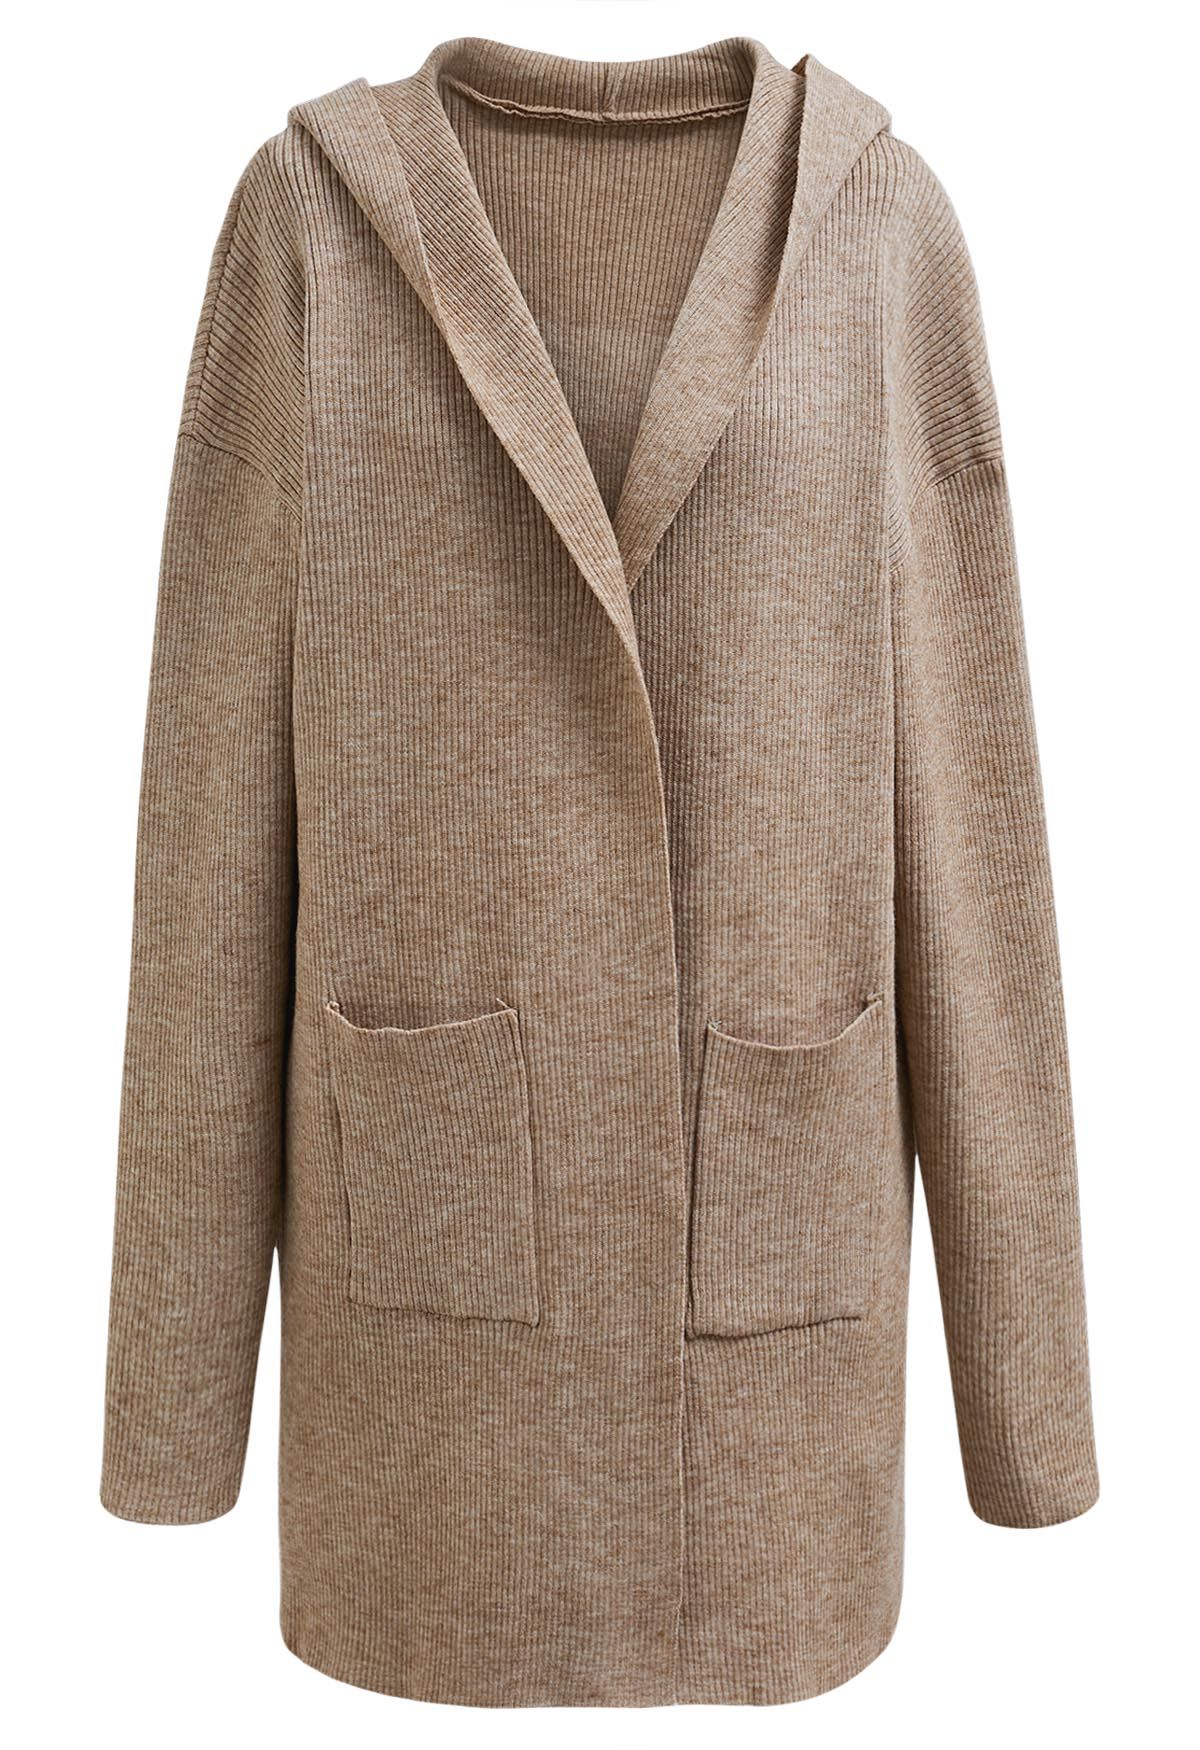 Patch Pockets Open Front Hooded Cardigan in Camel